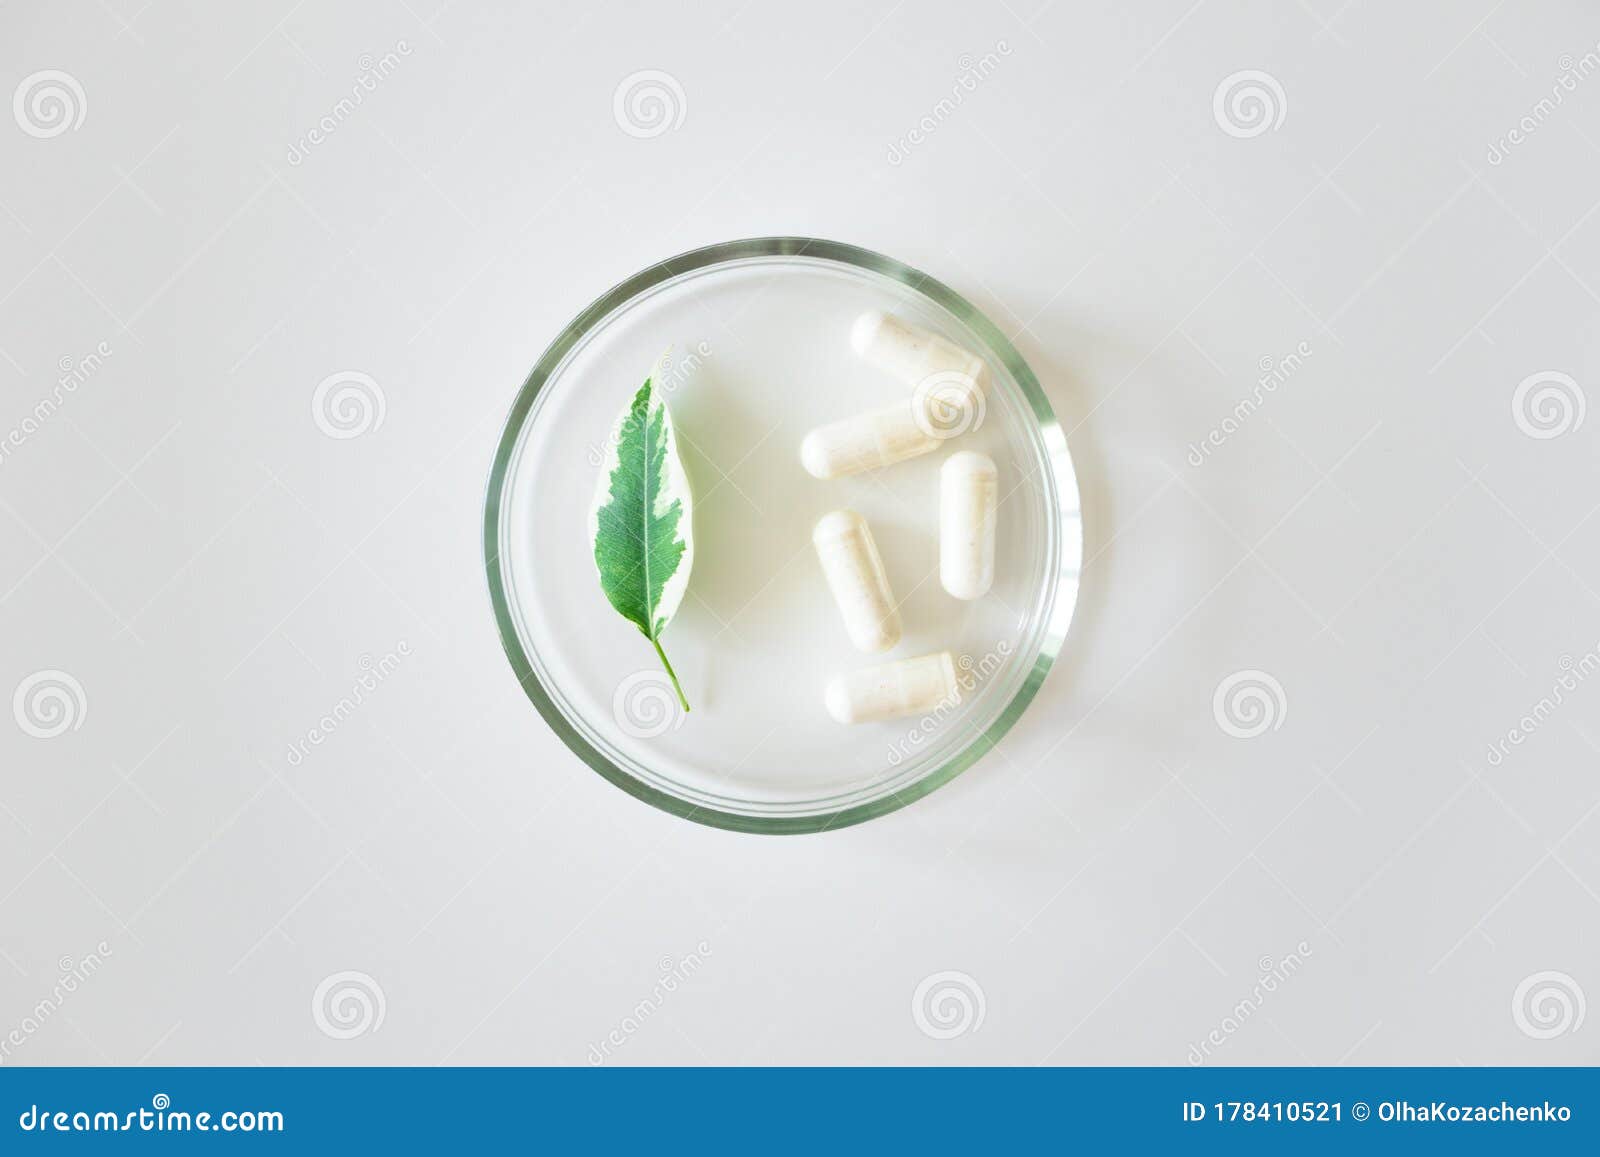 probiotic supplement in capsules and plant leaf in glass petri dish on white background, above. concept dietary supplement natural